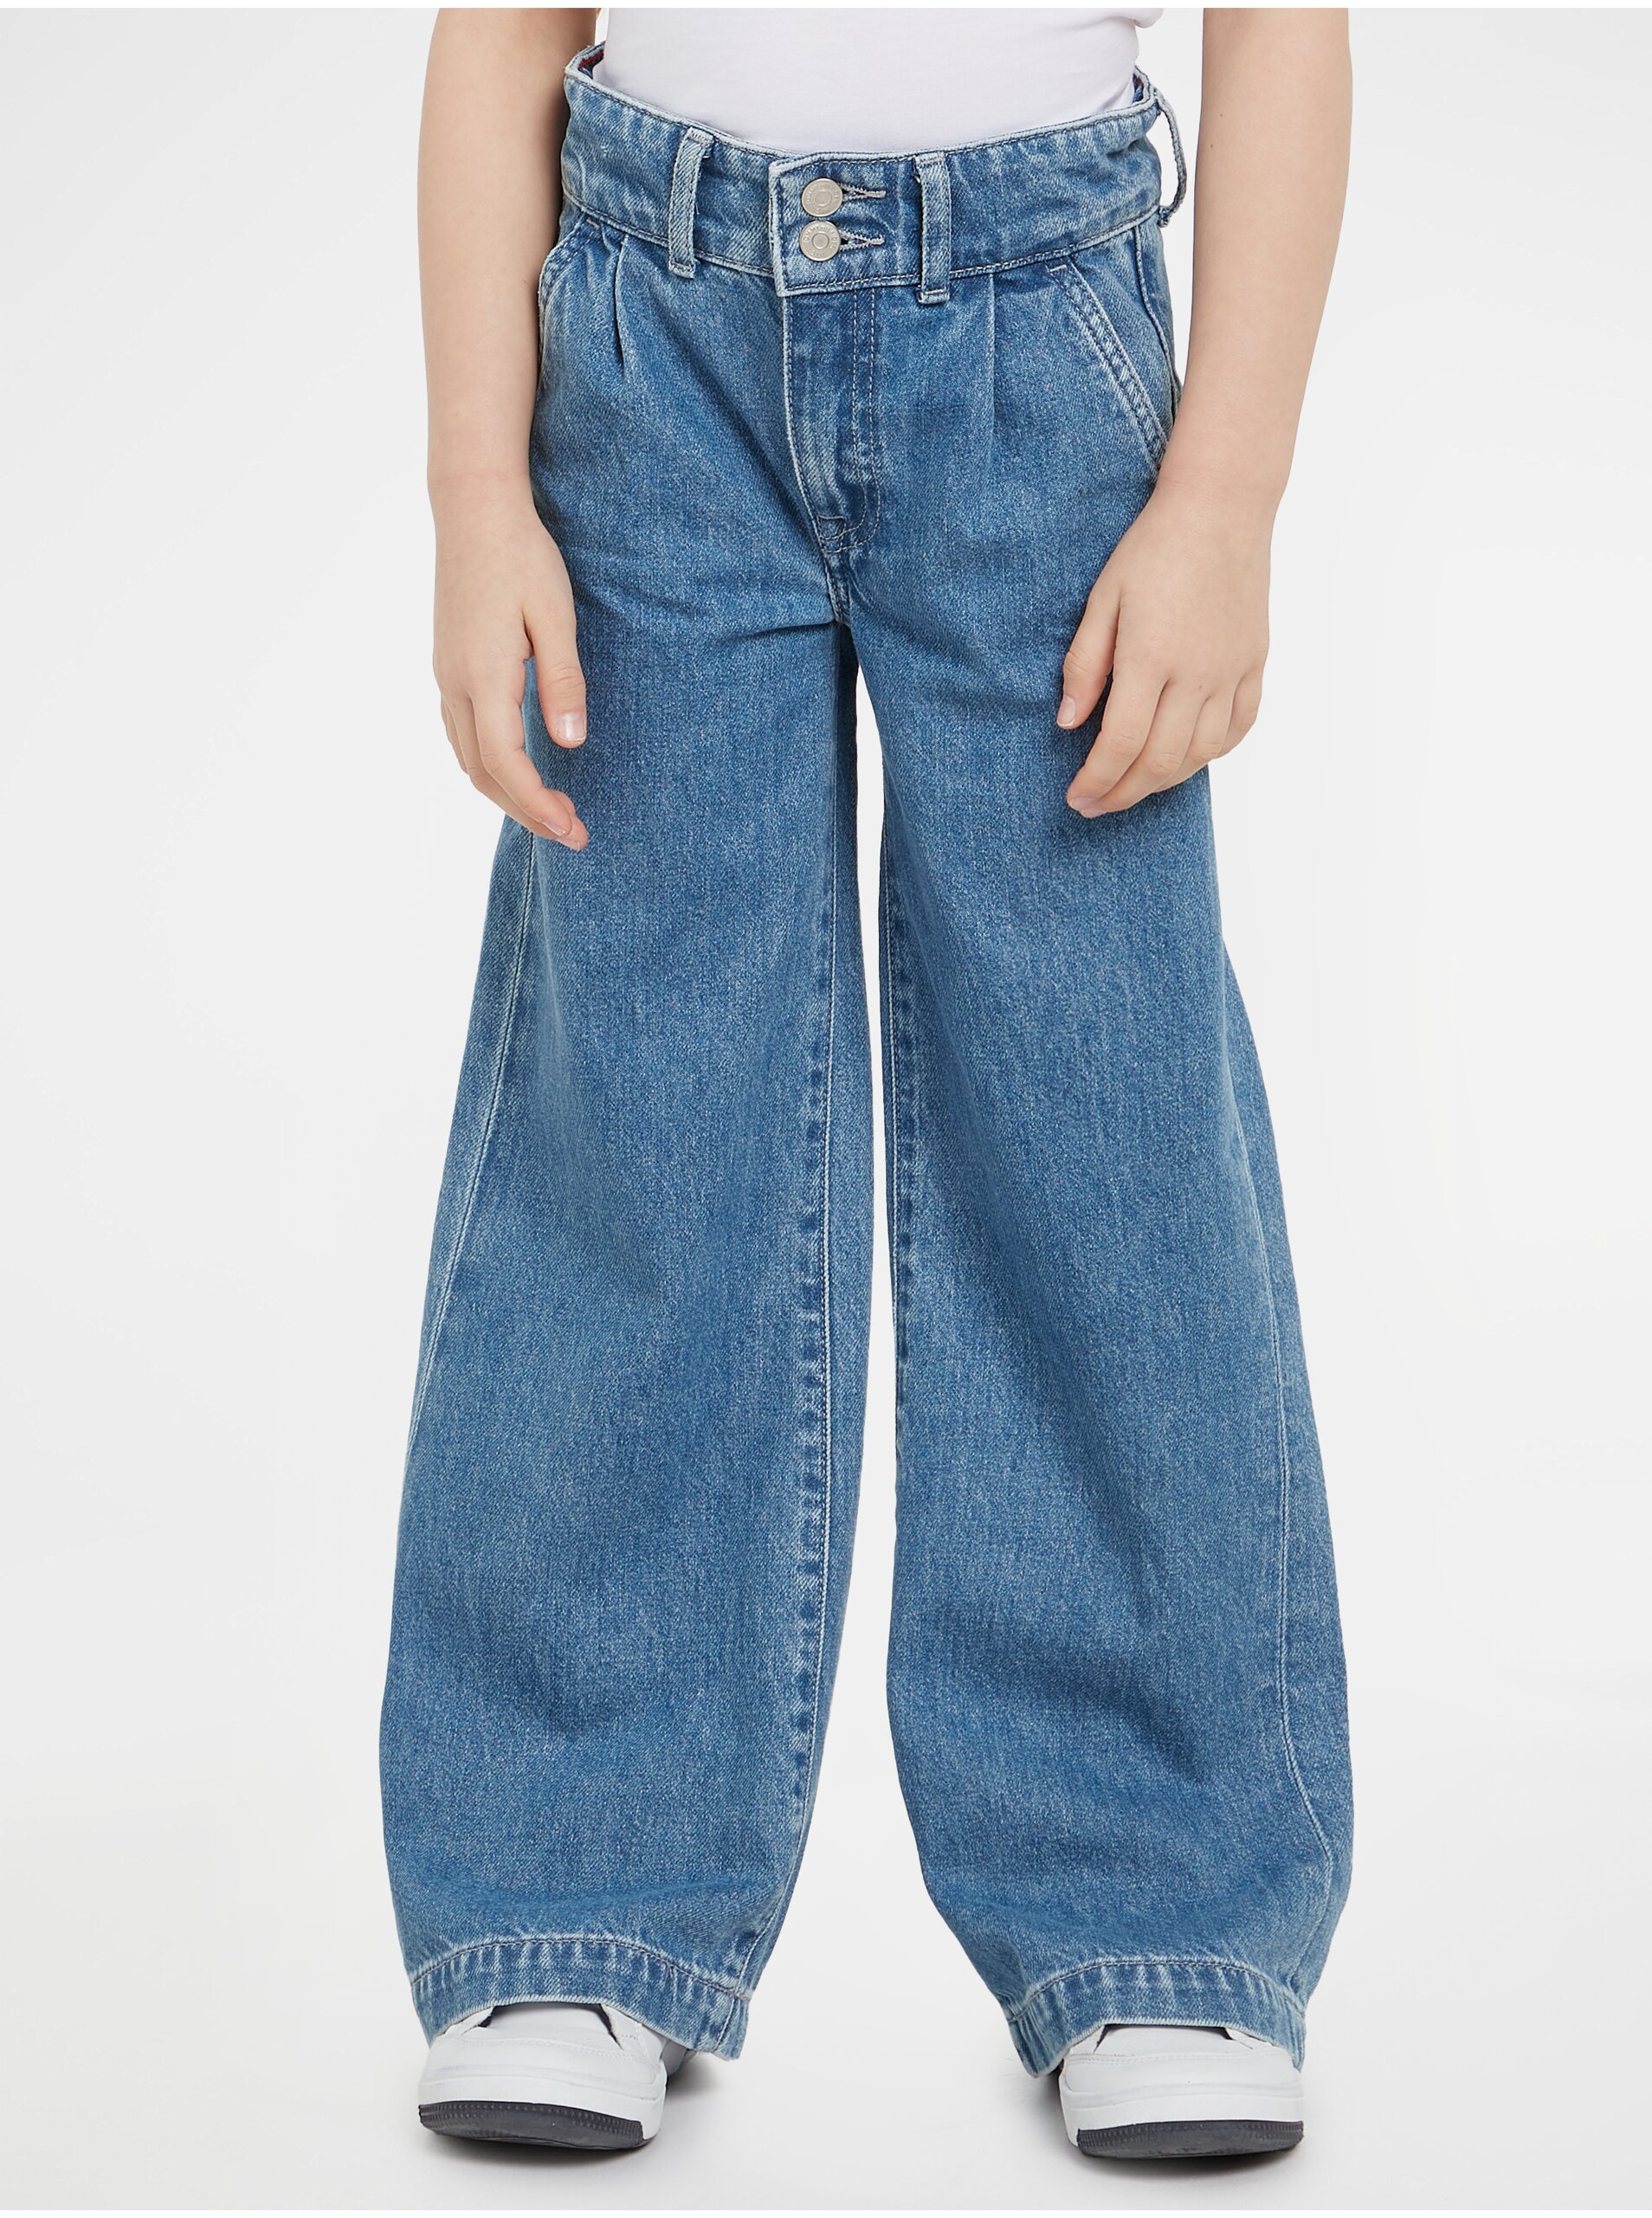 Blue Girly Wide Jeans Tommy Hilfiger - Girls